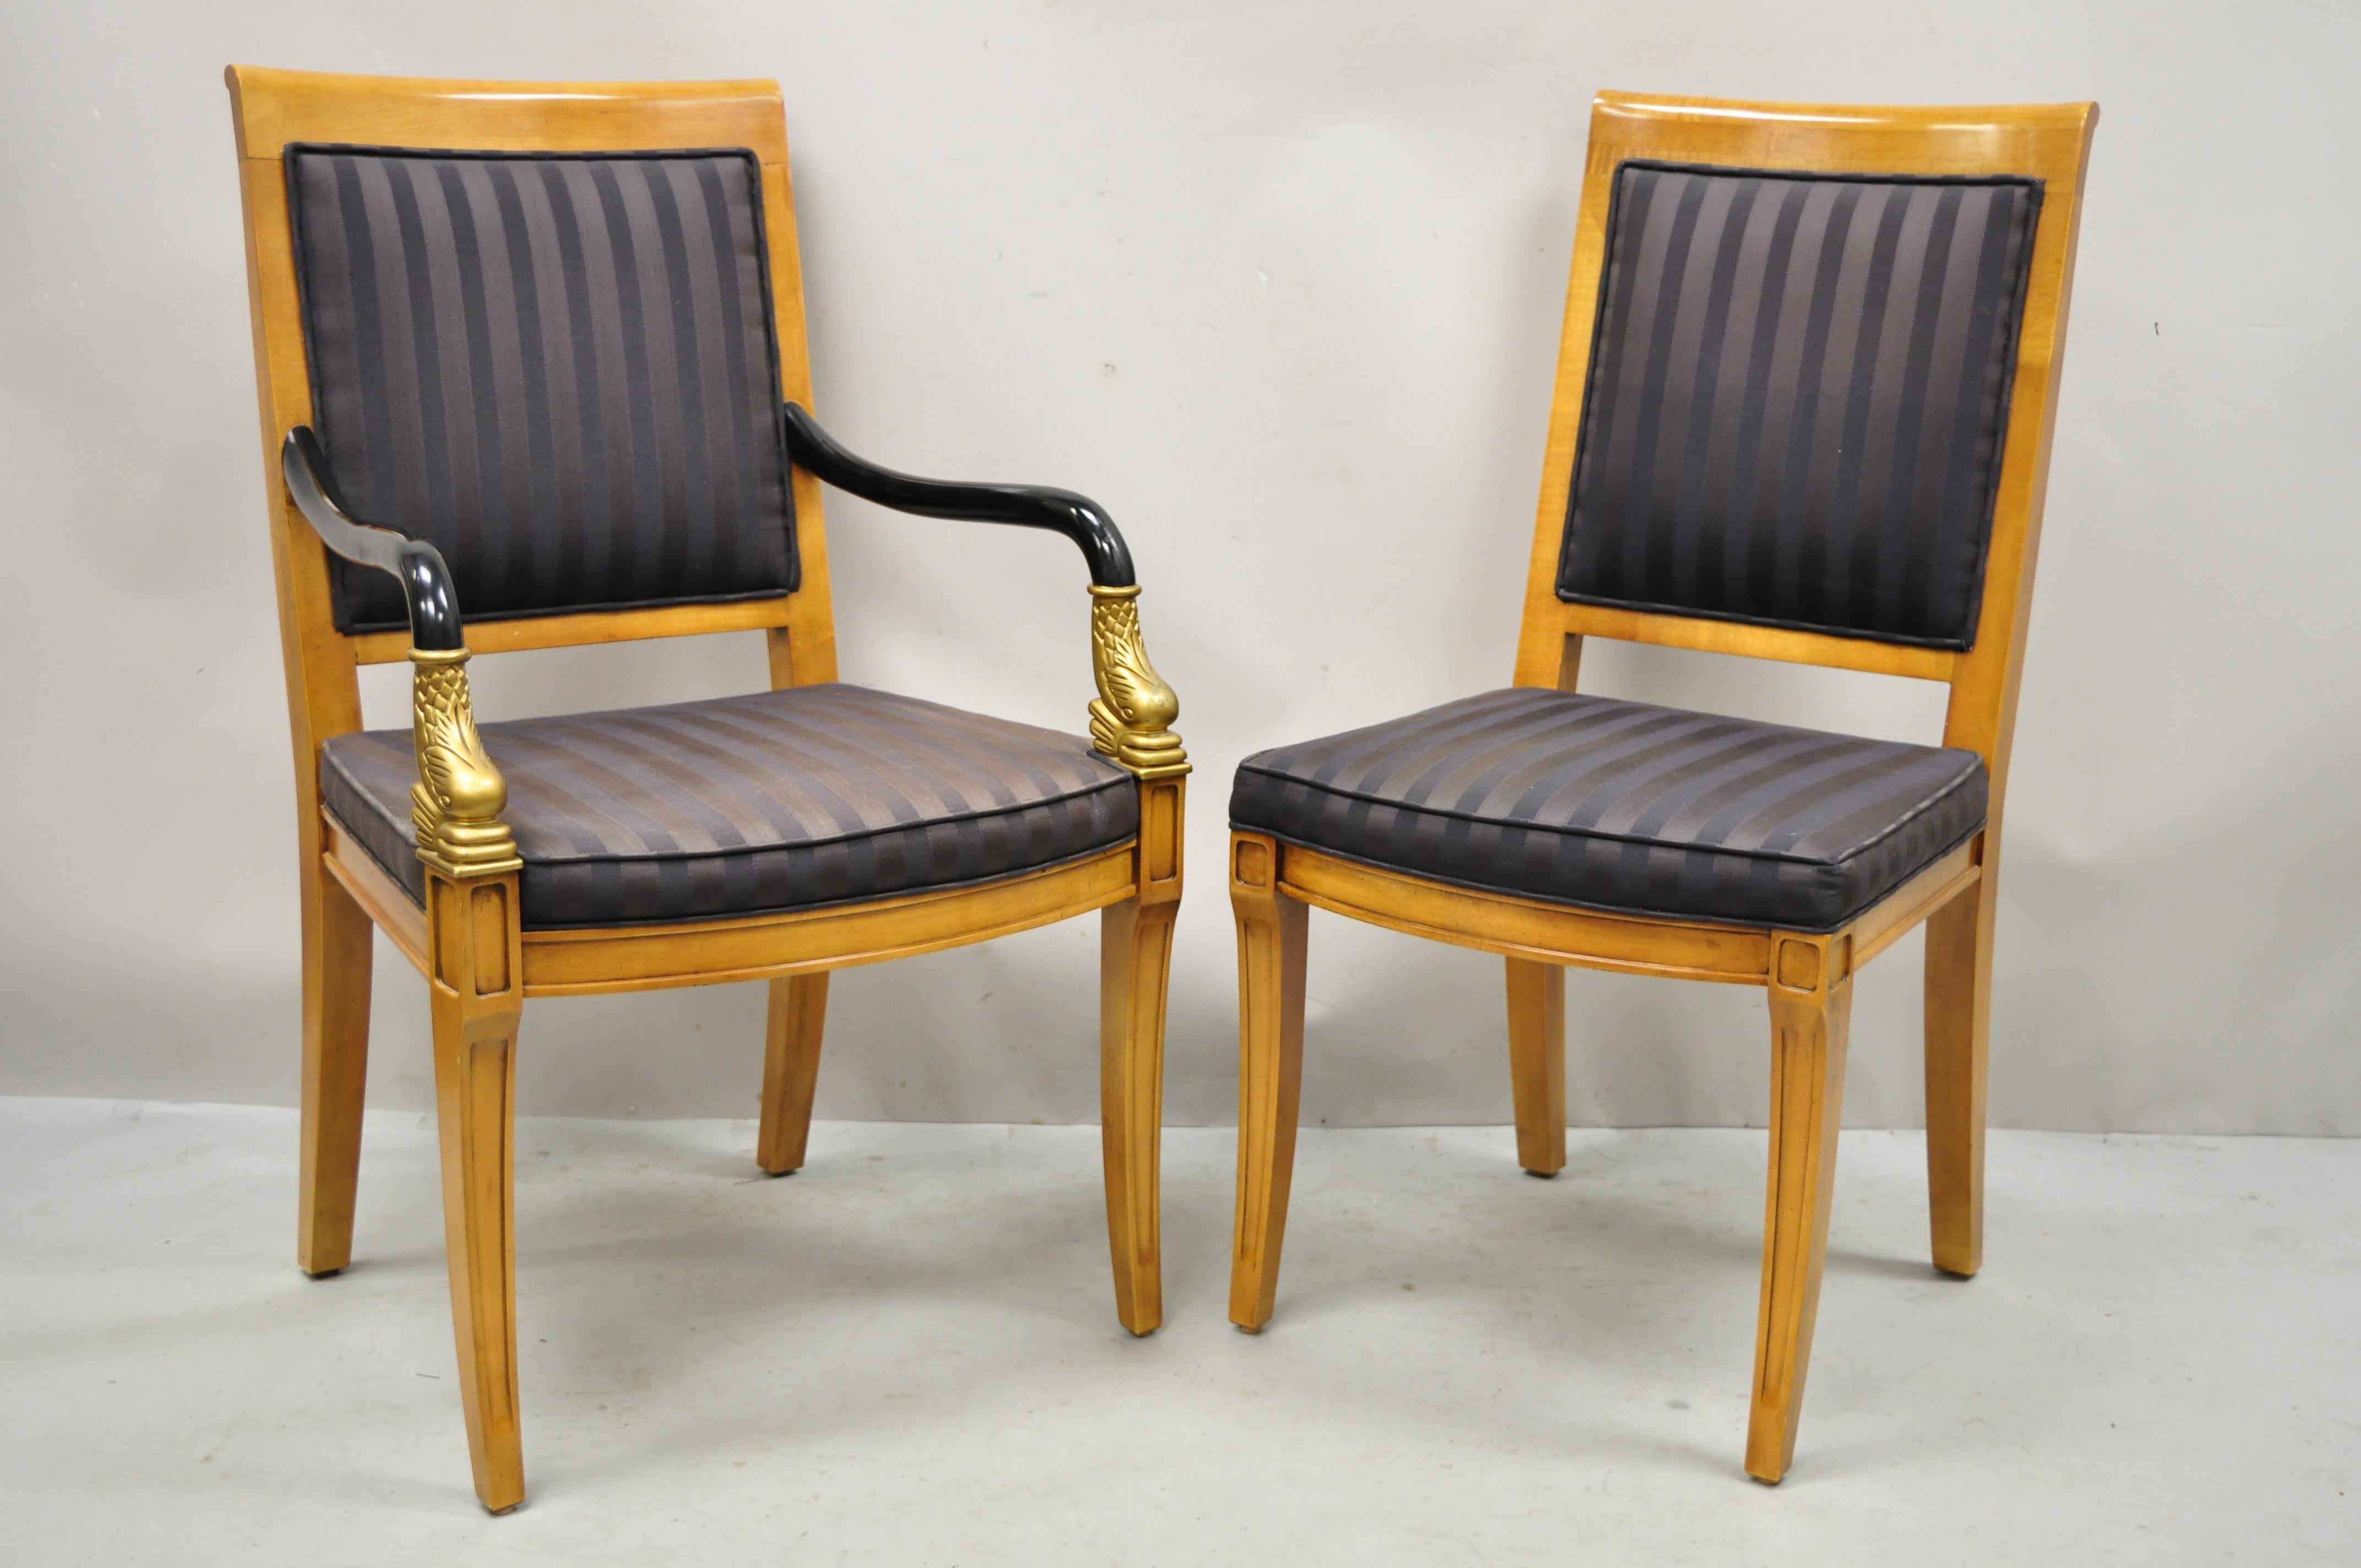 Century Furniture Co. Capuan Biedermier dining chairs with serpent arm - Set of 8. Set includes (2) armchairs, (6) side chairs, ebonized armrest, gold giltwood serpent/dolphin carved arms, saber legs, upholstered backs, solid wood frame, original